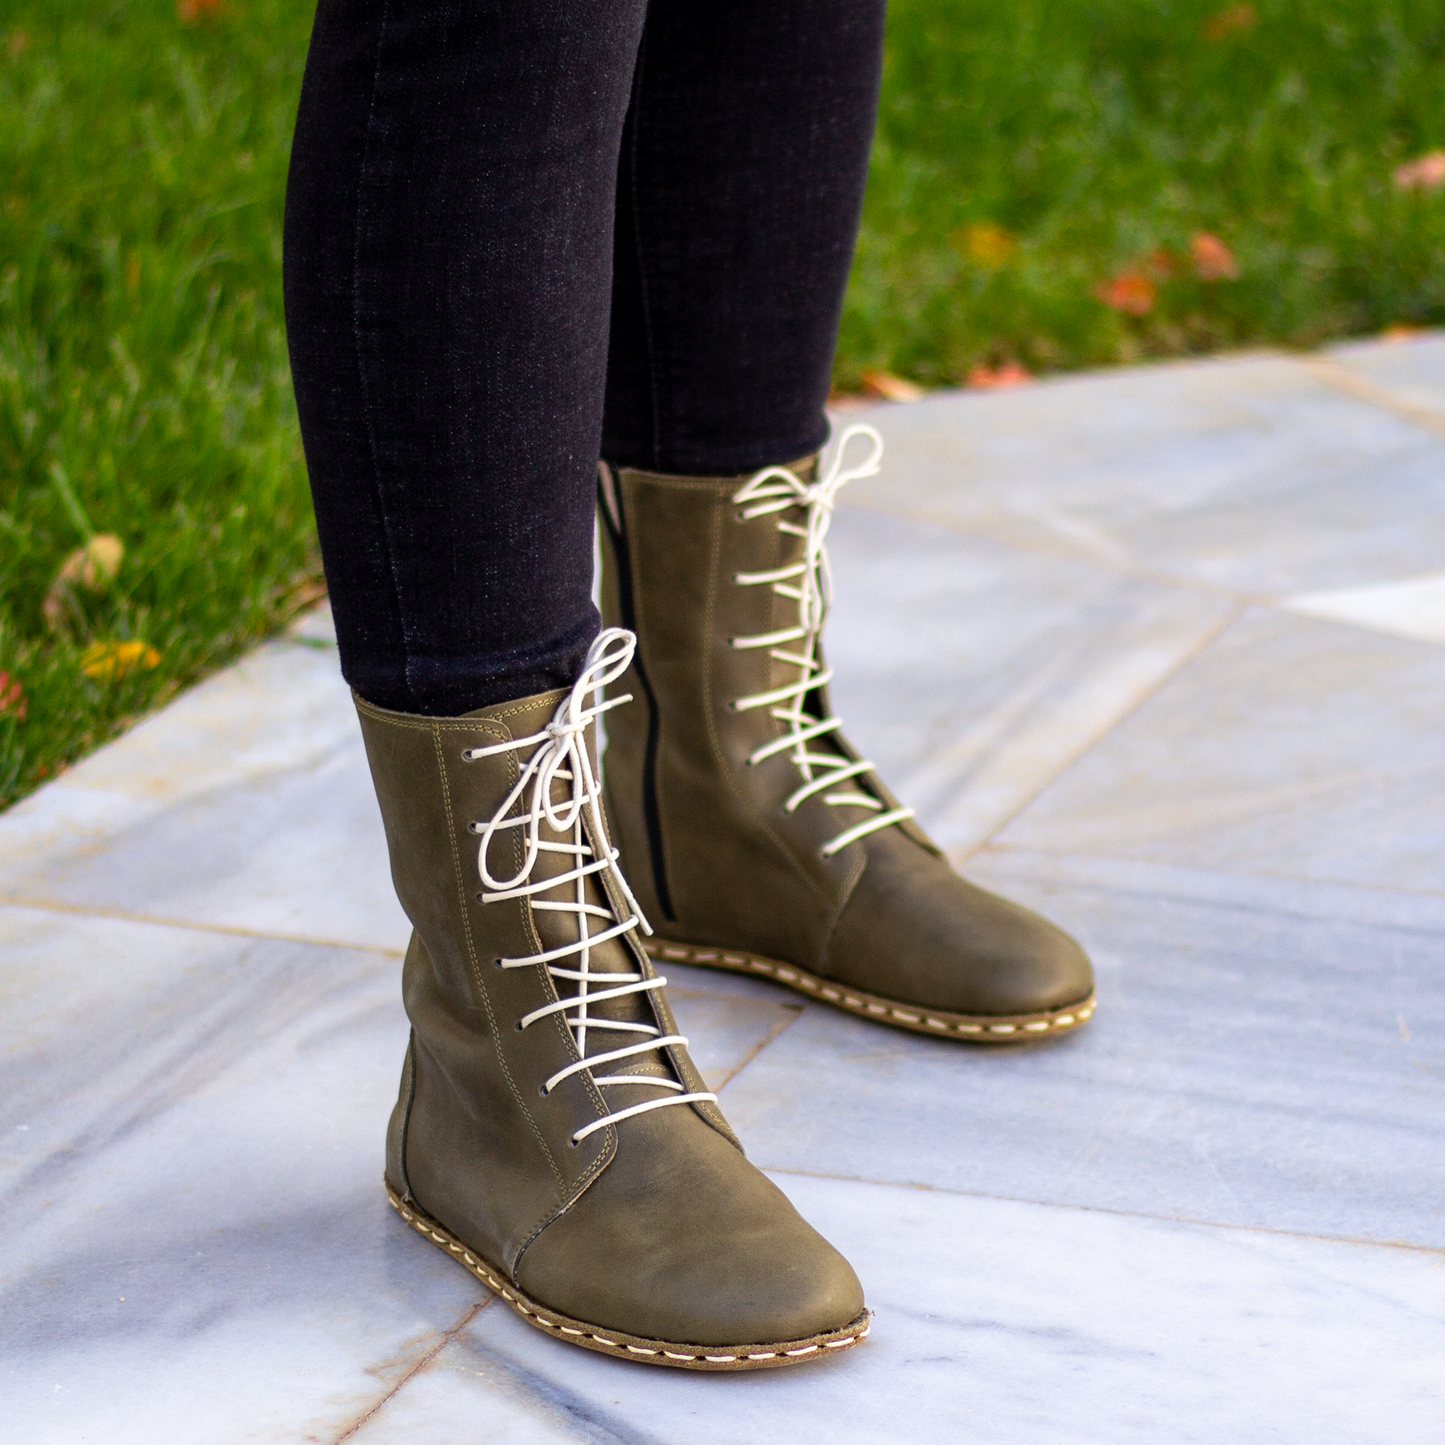 Green Leather Boot | Barefoot Women Boot | Earthing Leather Boots | Grounding Copper Rivet | Buffalo Leather Outsole | Crazy Olive Green